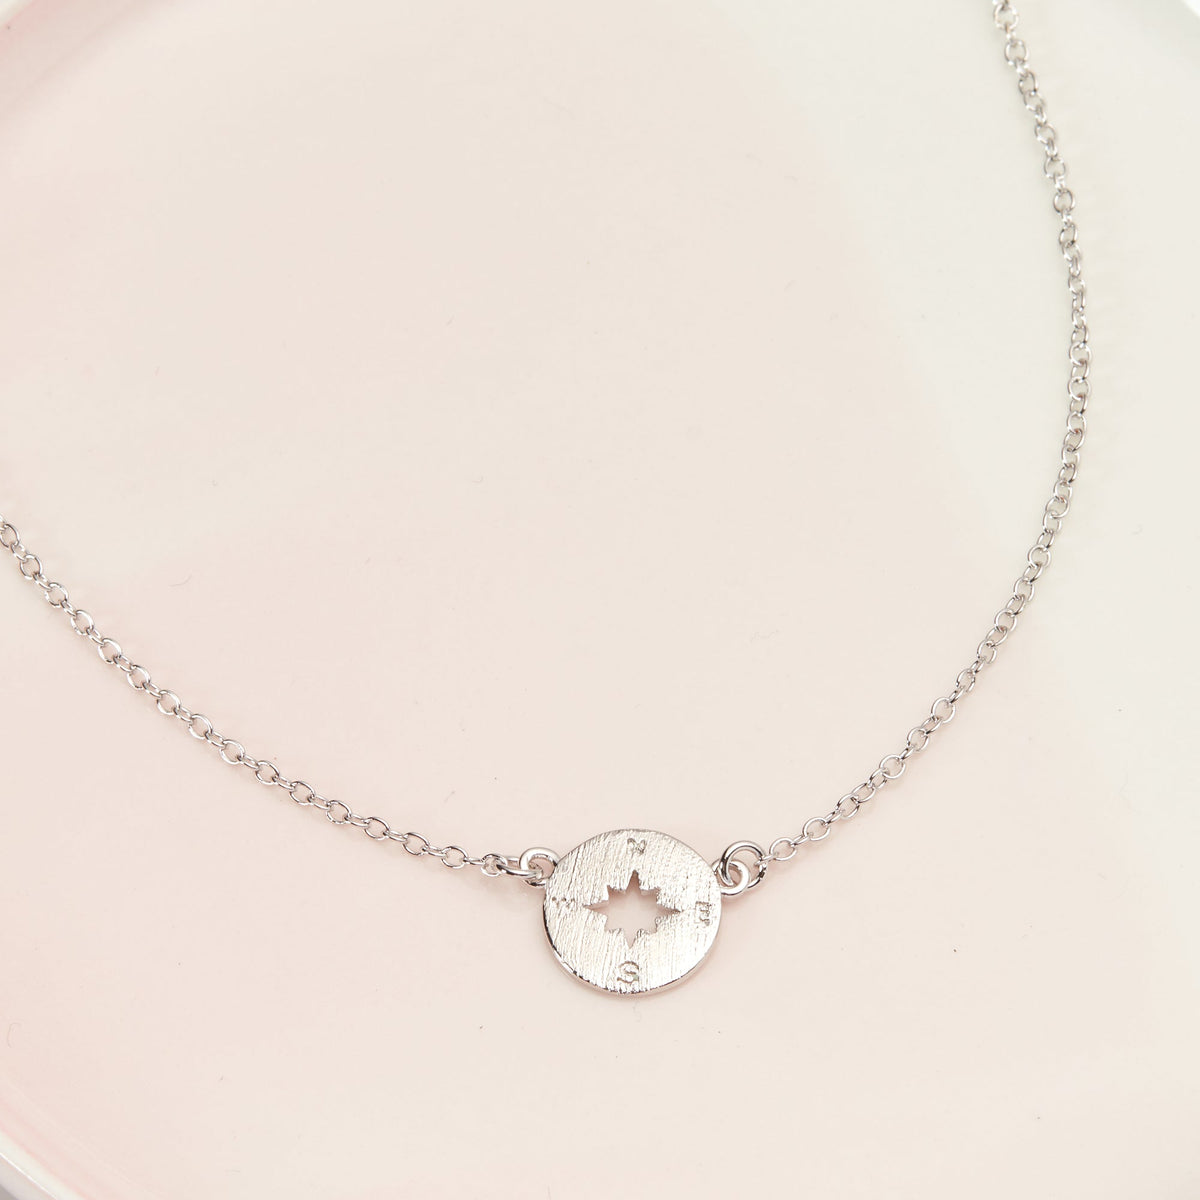 Sisters Compass Necklace